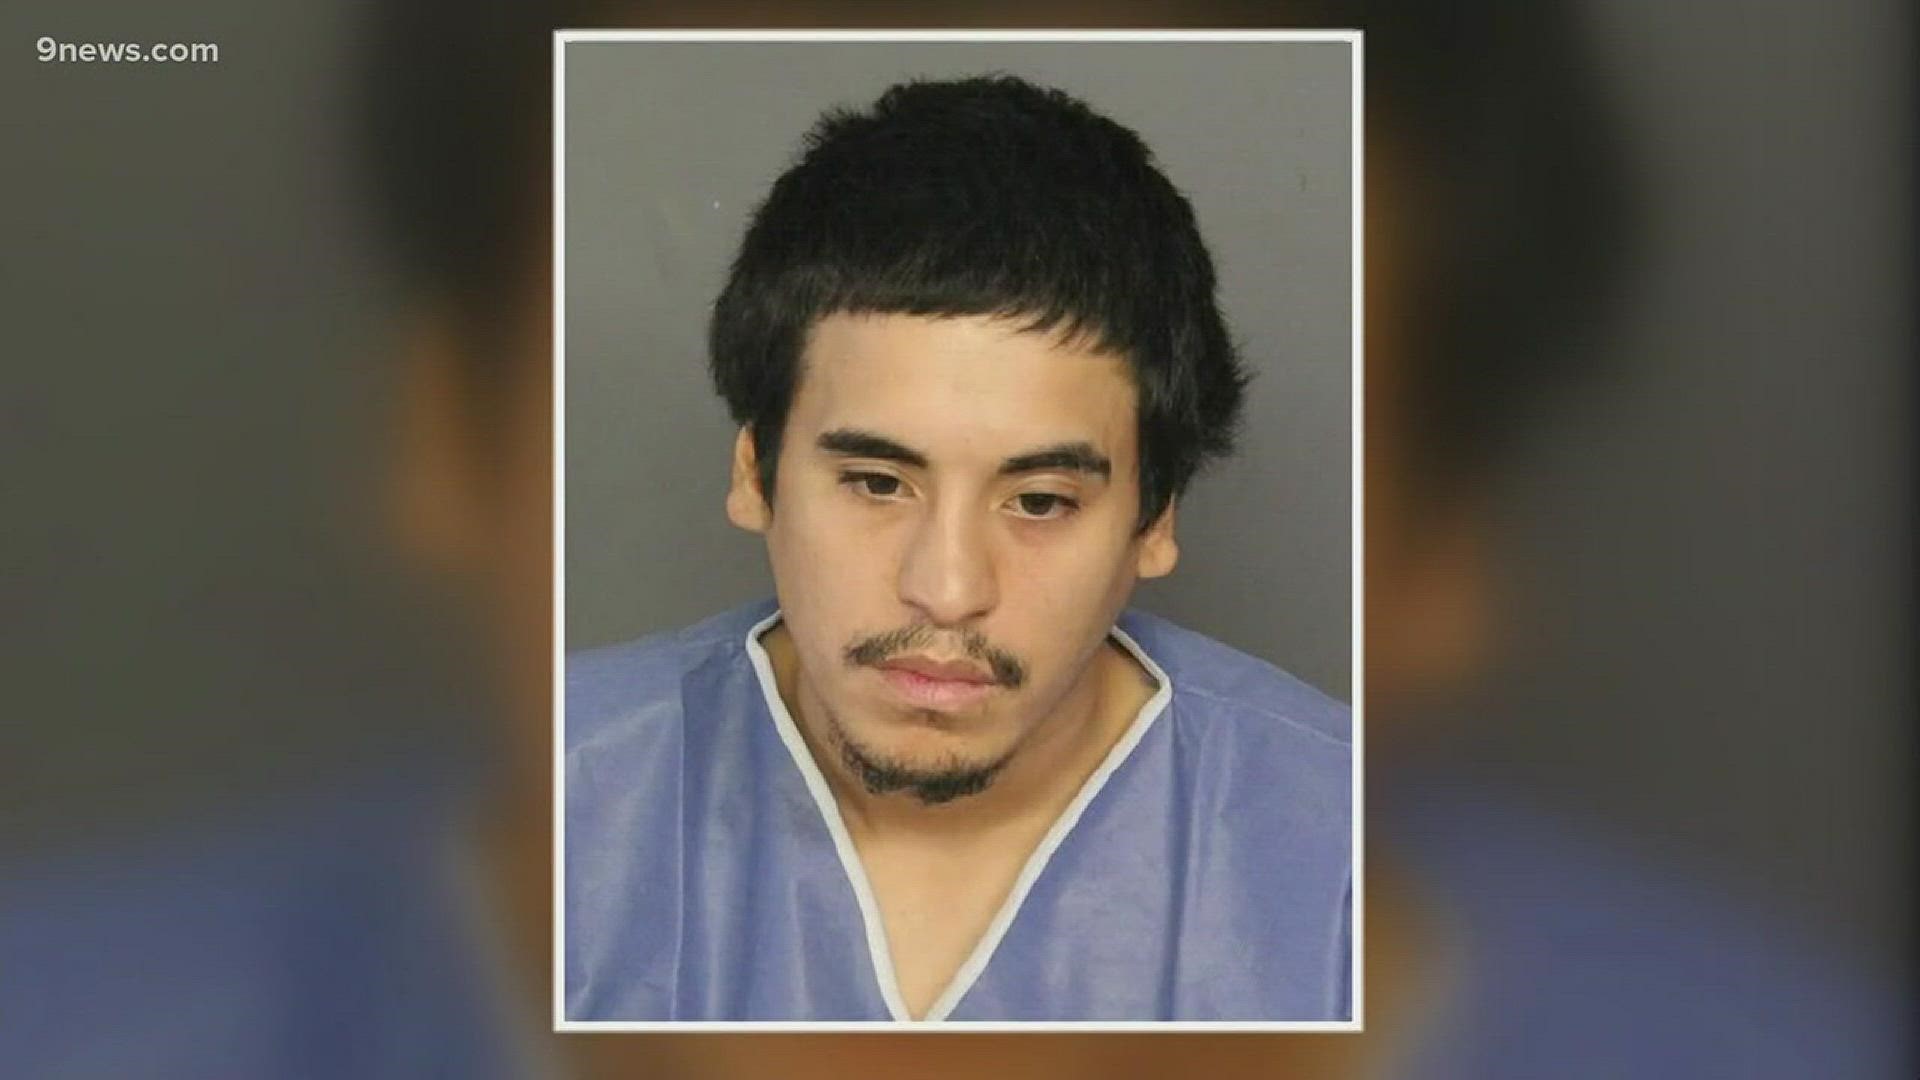 Mauricio Venzor-Gonzalez escaped during a transfer from the Denver Detention Center to the Denver Health Medical Center. He was on the run for 5 months.